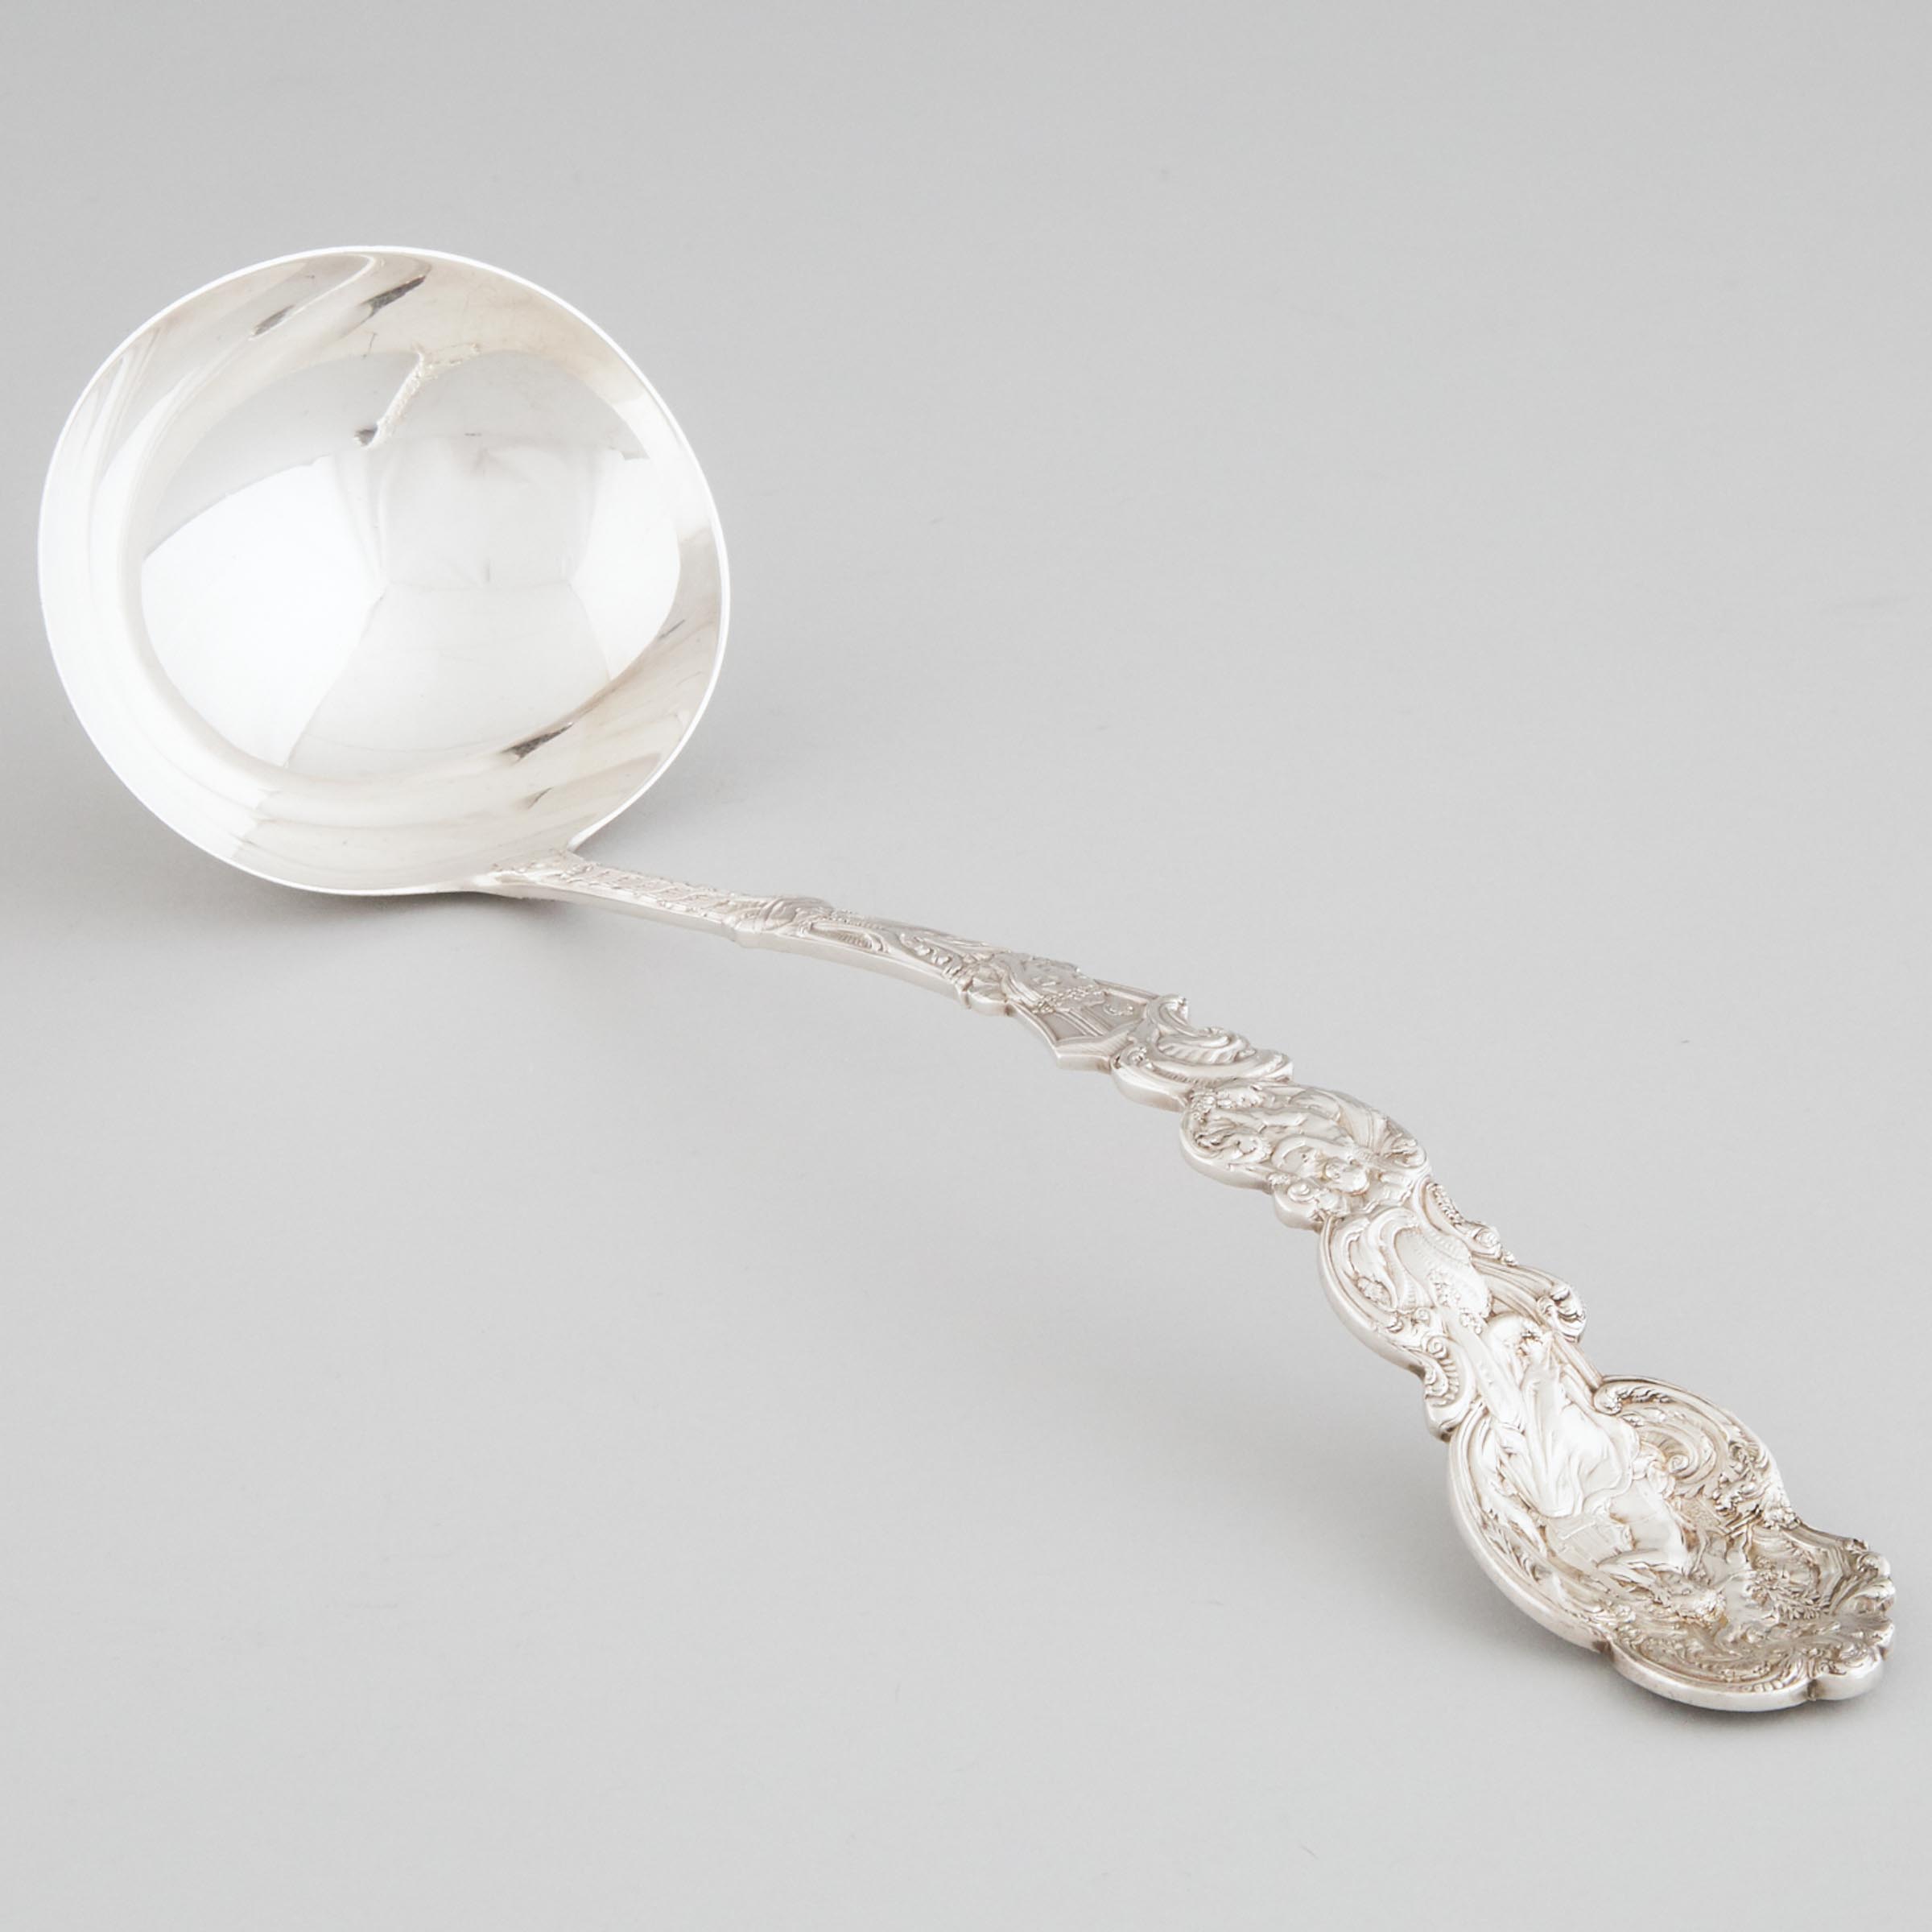 American Silver ‘Versailles’ Pattern Soup Ladle, Gorham Mfg. Co., Providence, R.I., c.1900